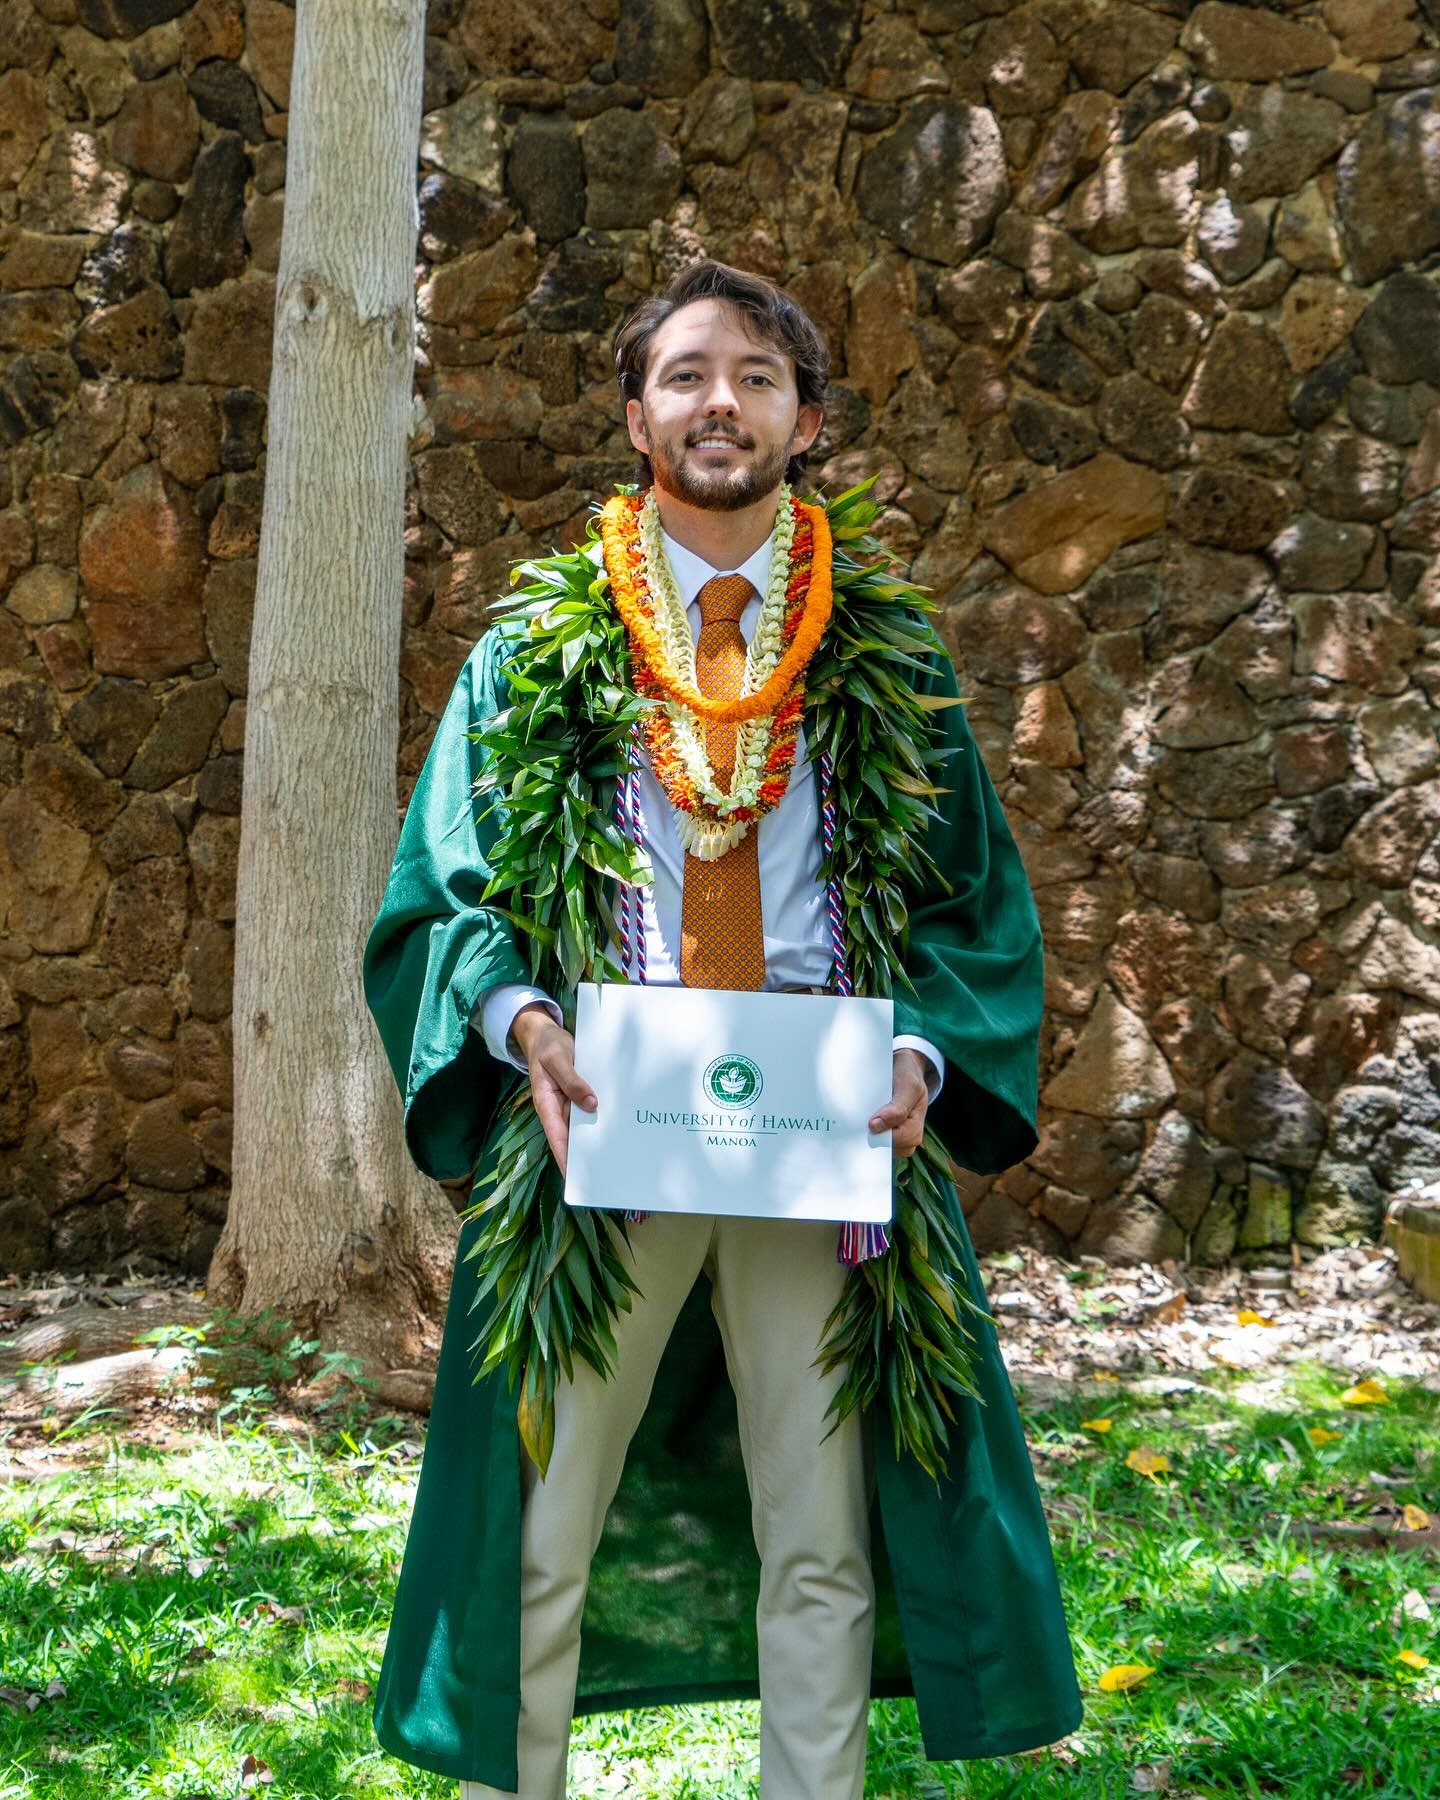 4.5 years after leaving the Air Force, I finally completed my undergraduate studies at the University of Hawai&rsquo;i. I feel beyond blessed to have studied on this beautiful island and to have met some amazing people who will forever be my friends.